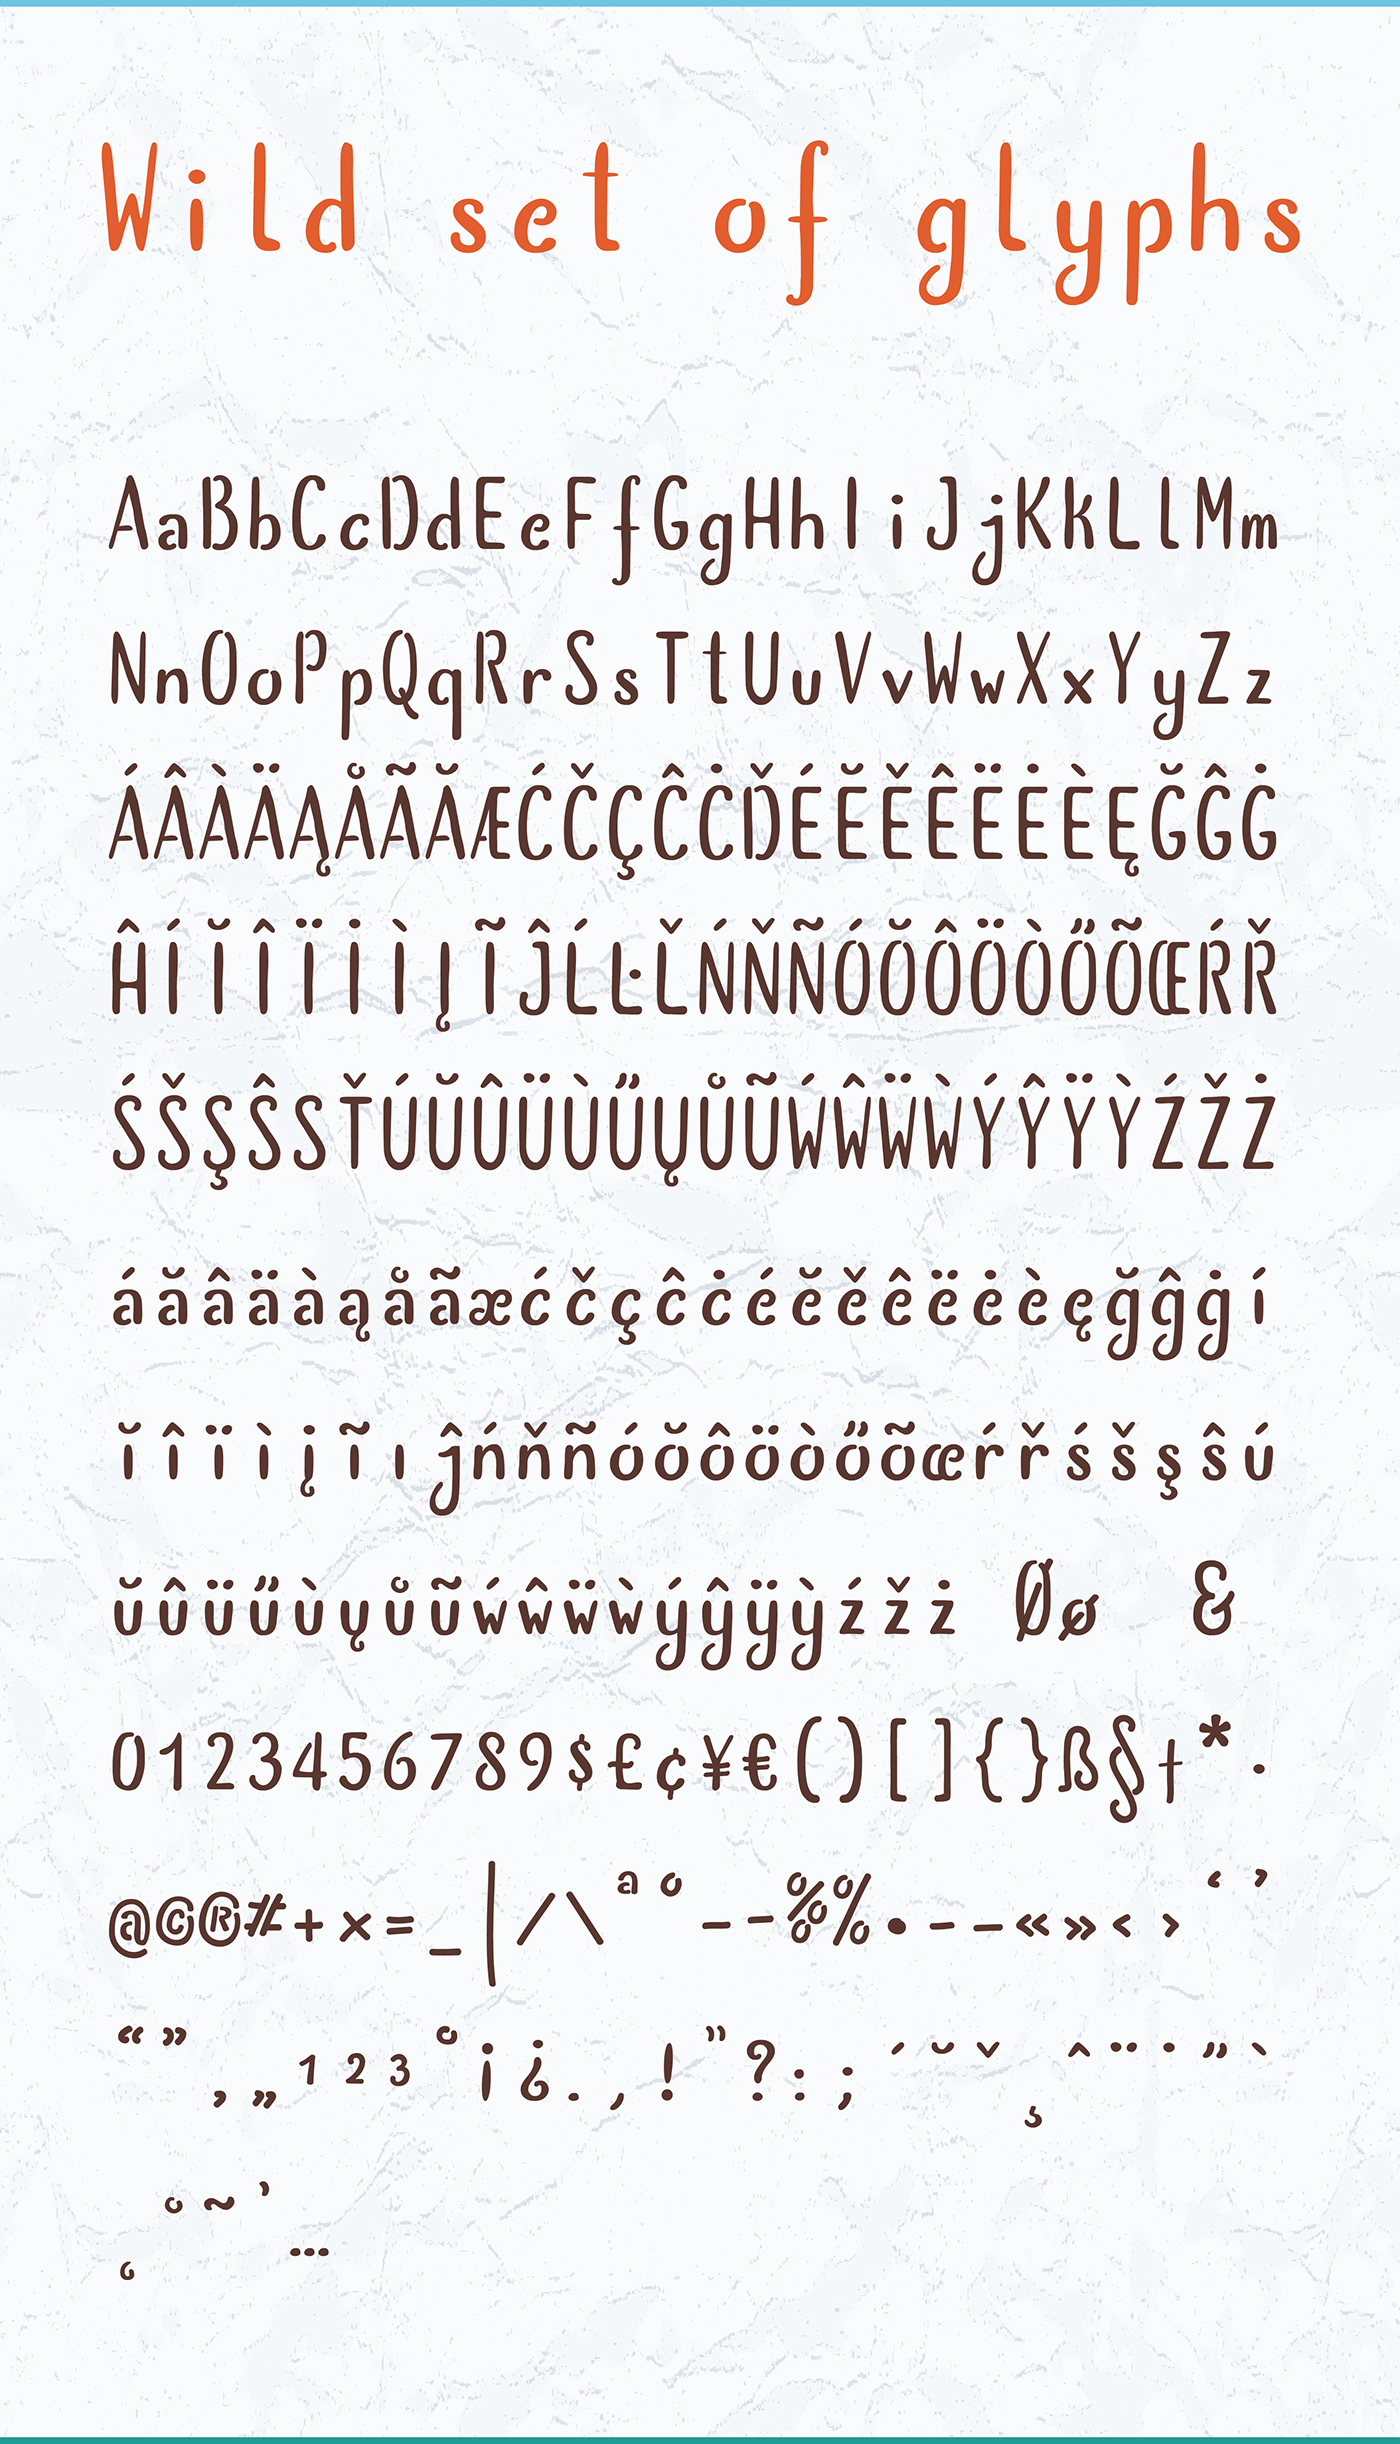 tipography Typeface font Display stencil monospaced ILLUSTRATION  Fun